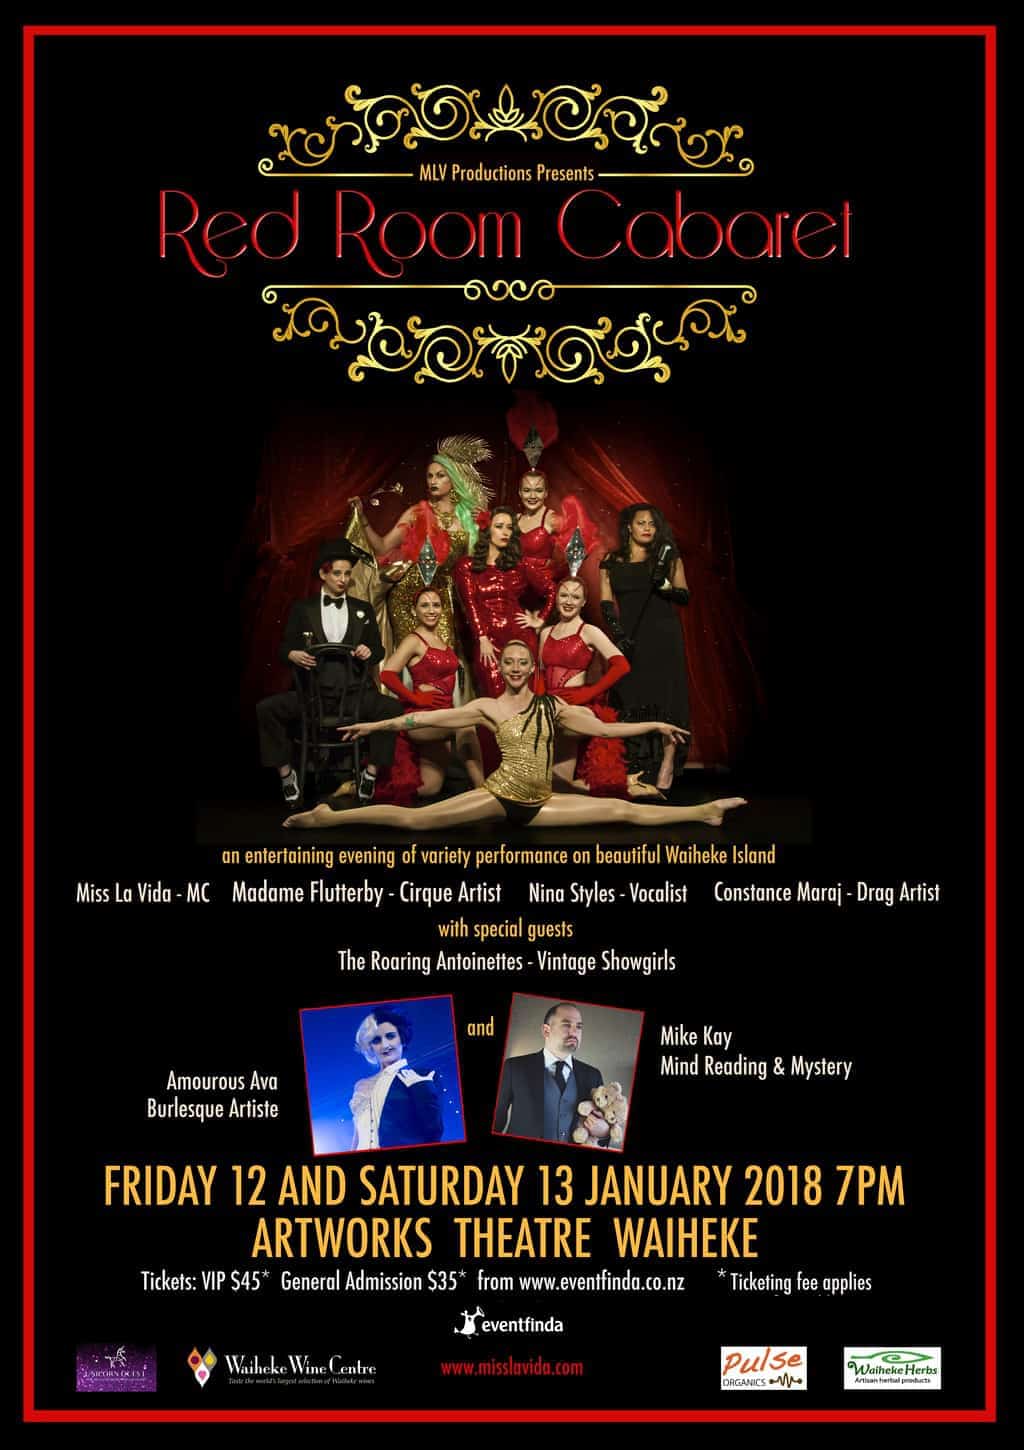 The Red Room Cabaret, January 2018